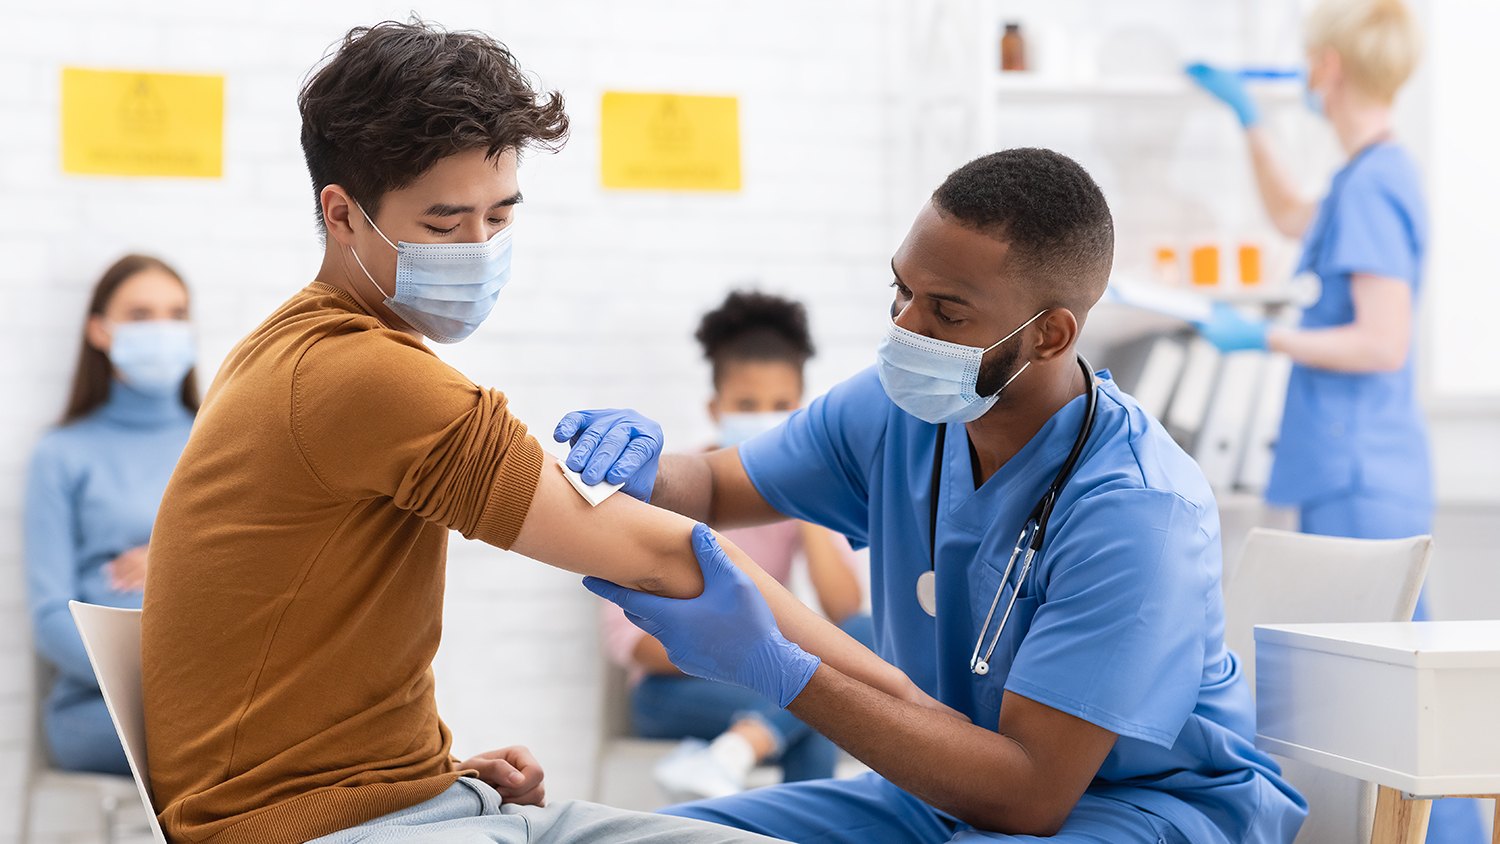 Healthcare professional dressed in blue scrubs administers vaccination to seated patient.